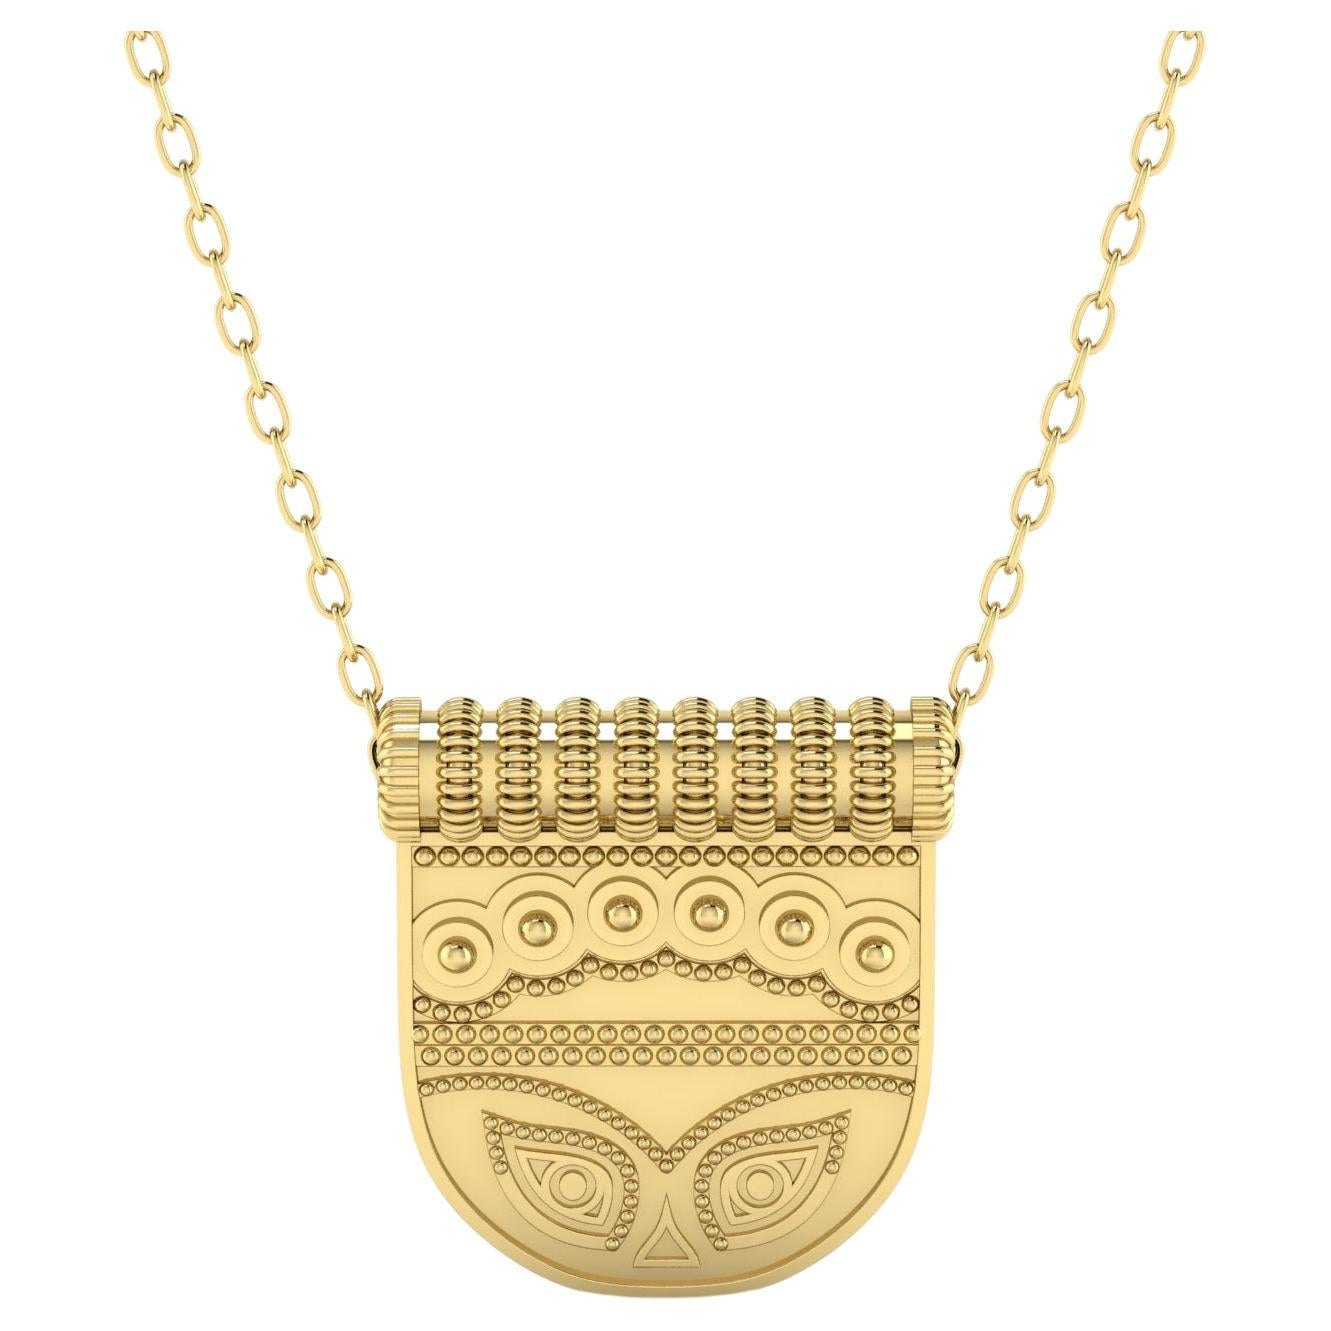 22 Karat Gold Mask Necklace by Romae Jewelry Inspired by an Ancient Design